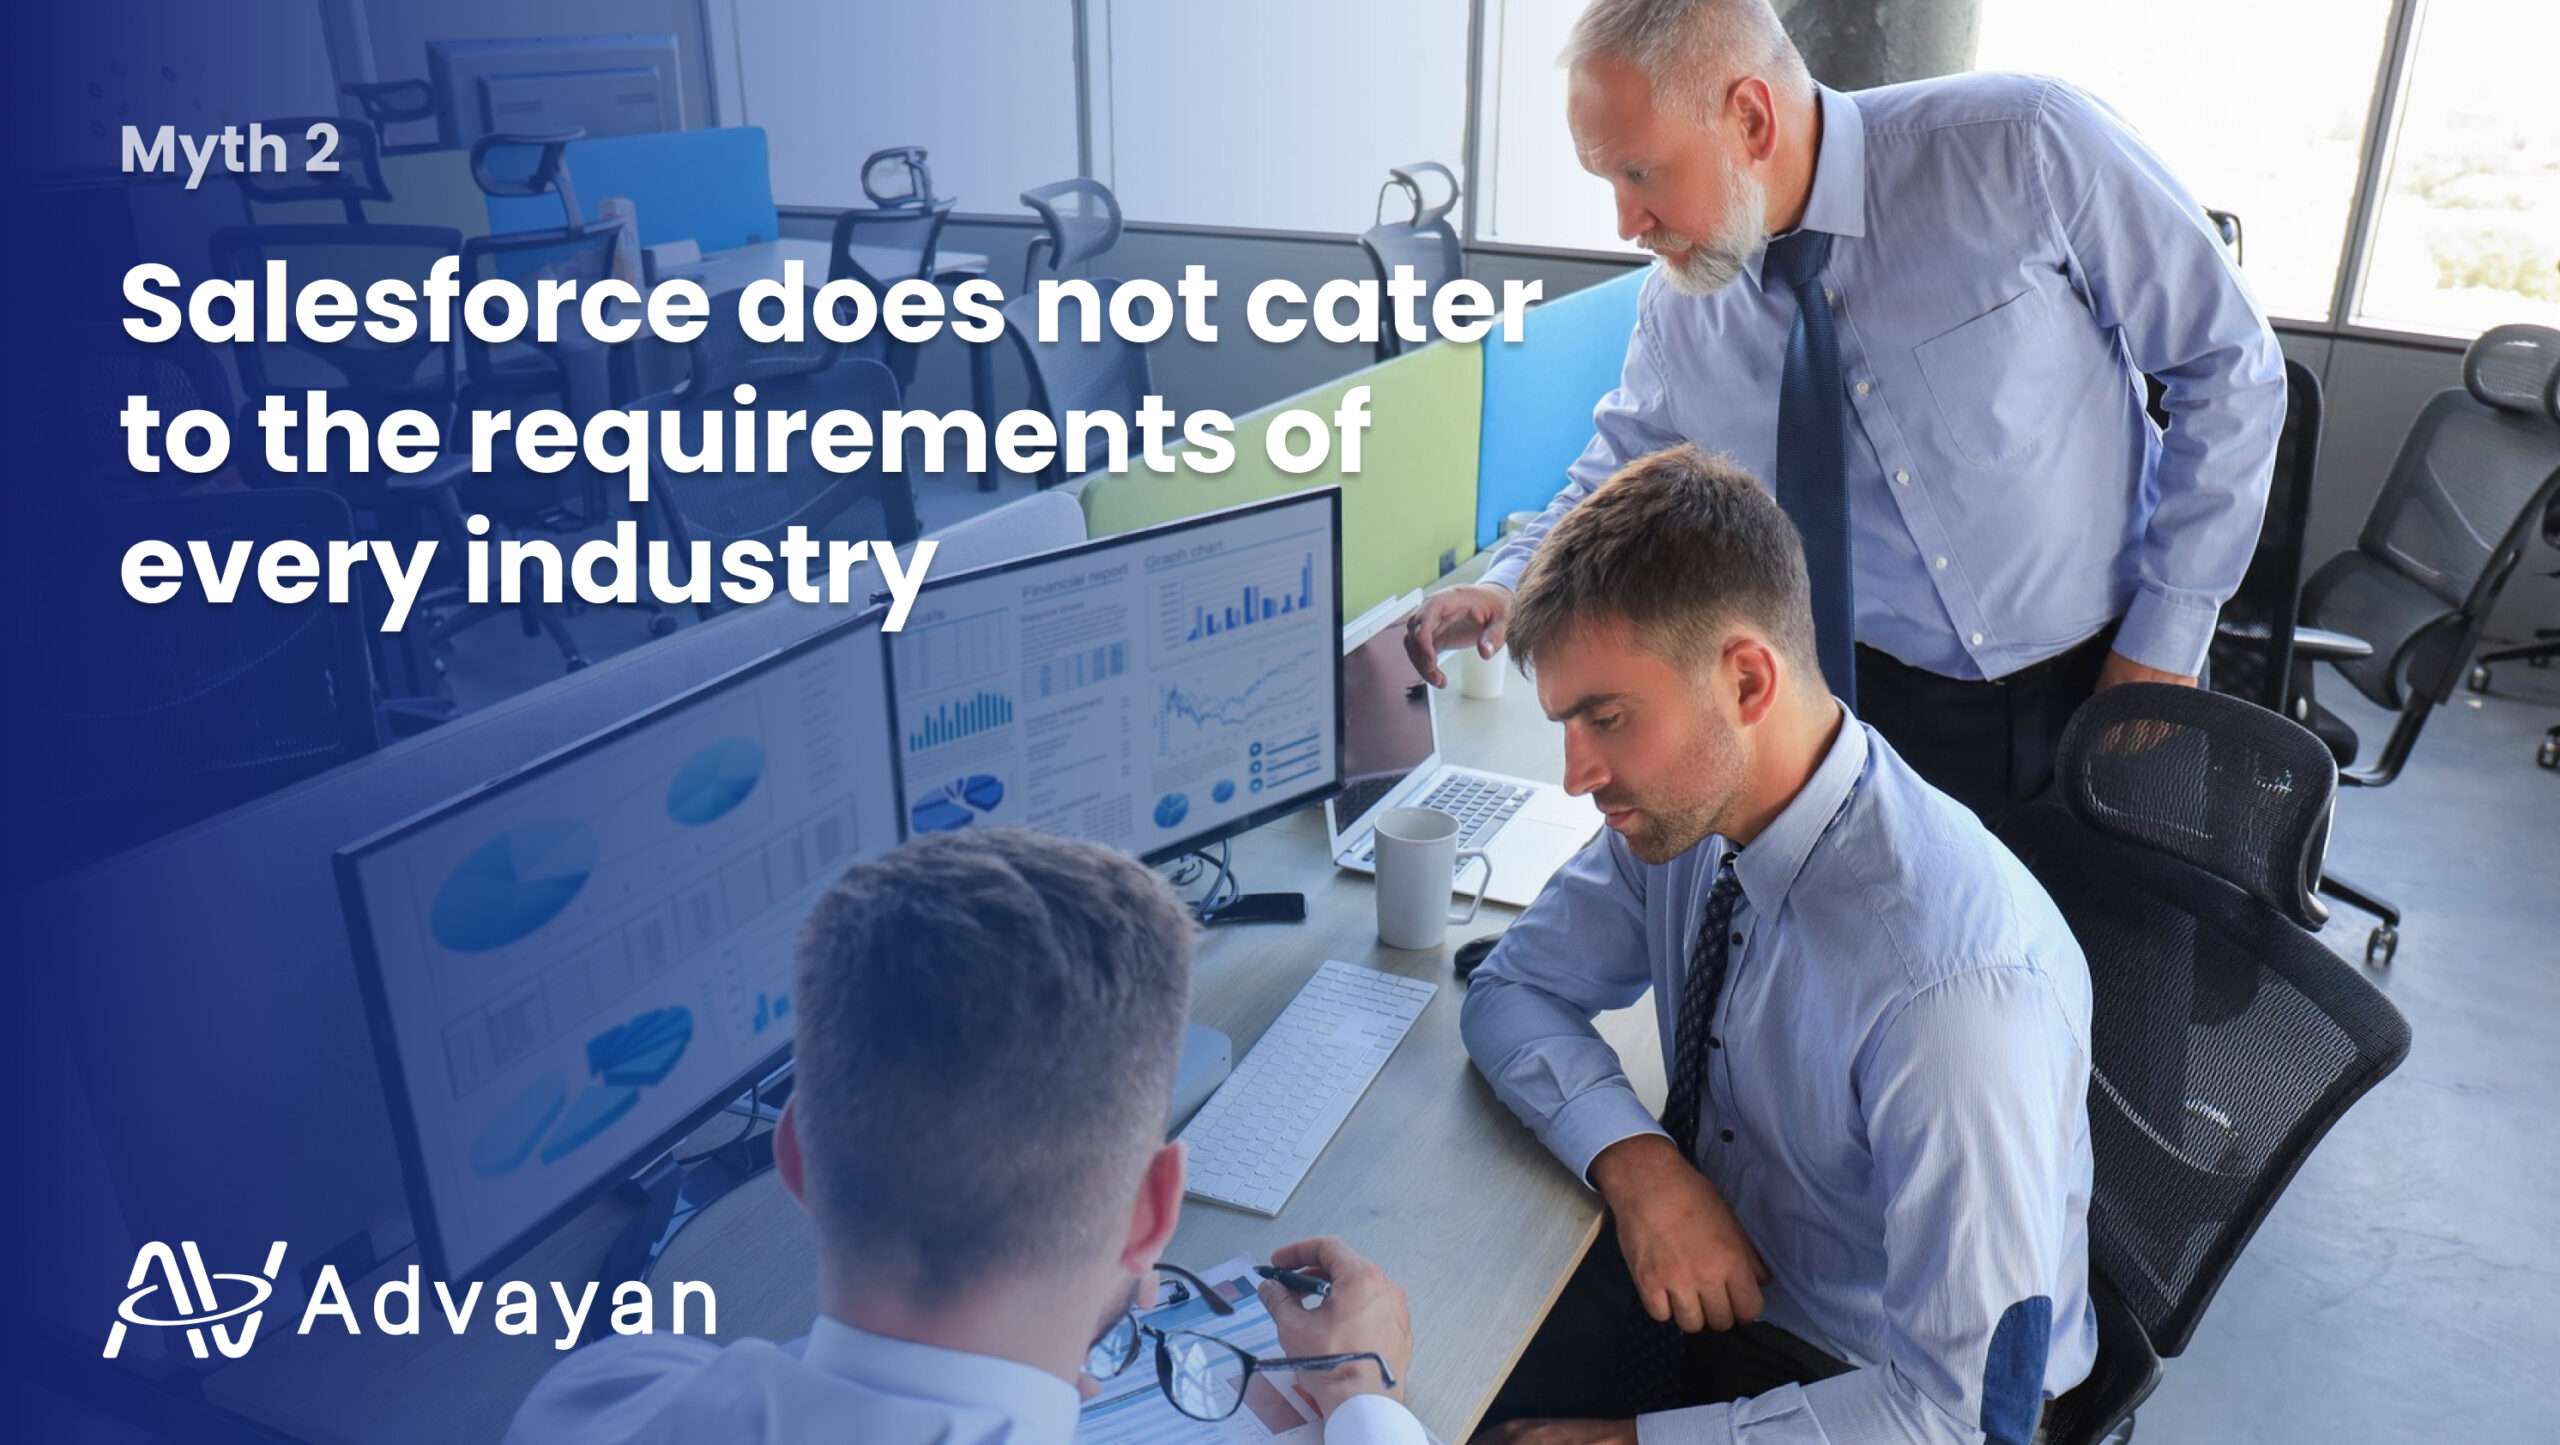 Myth 2 Salesforce does not cater to the requirements of every industry